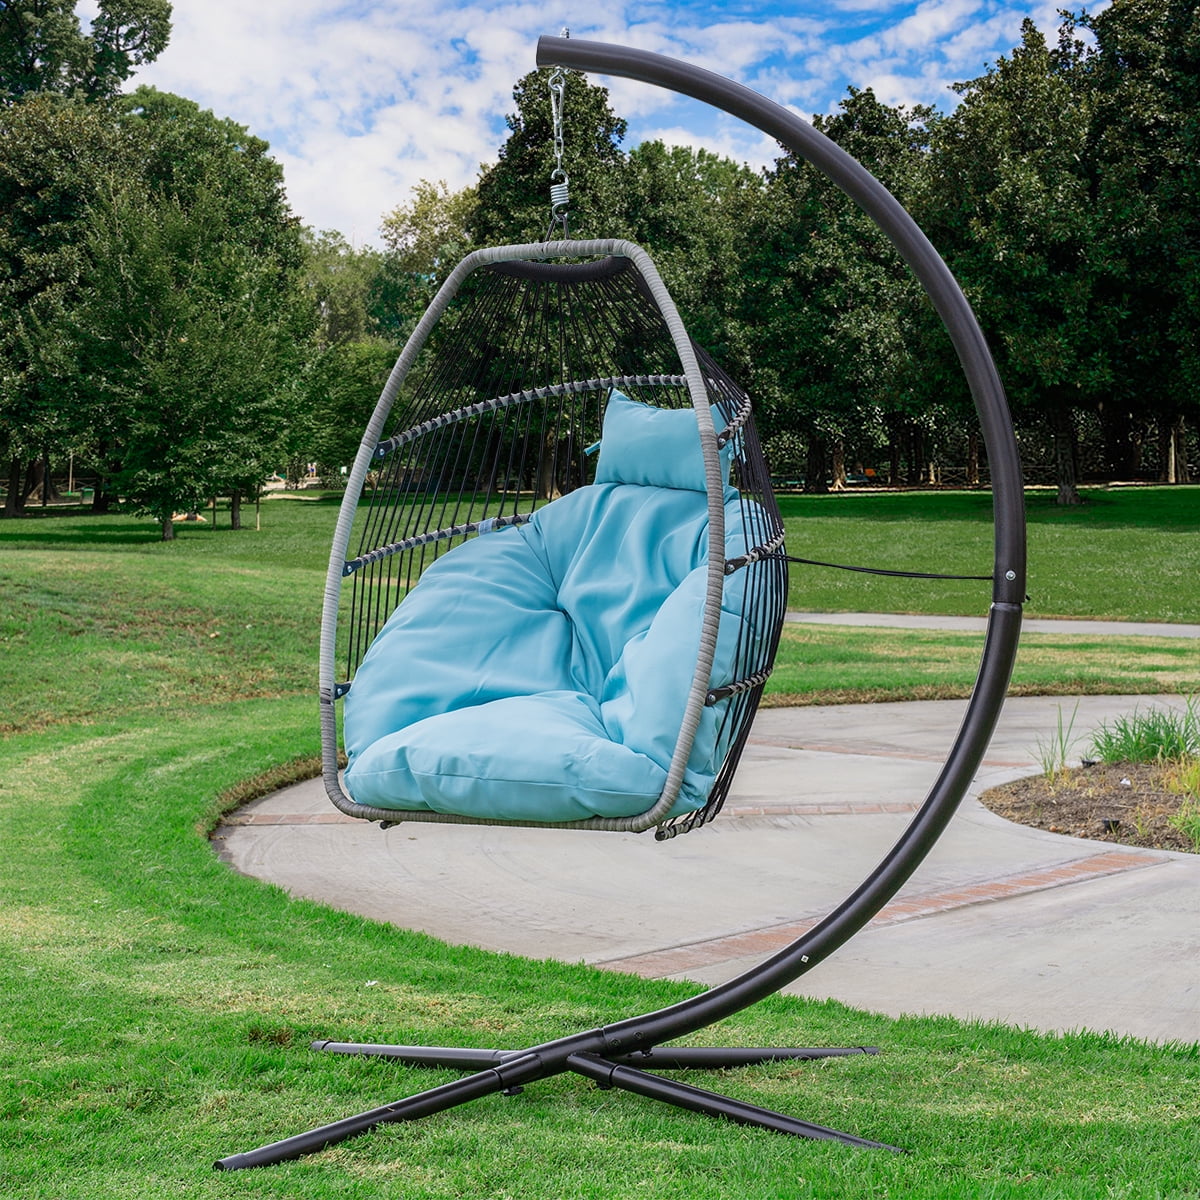 Garden Swing Egg Chair with Dark Grey Cushion and Aluminum Frame for The Patio Dark Grey Living Room. Bellemave Wicker Hanging Egg Chair